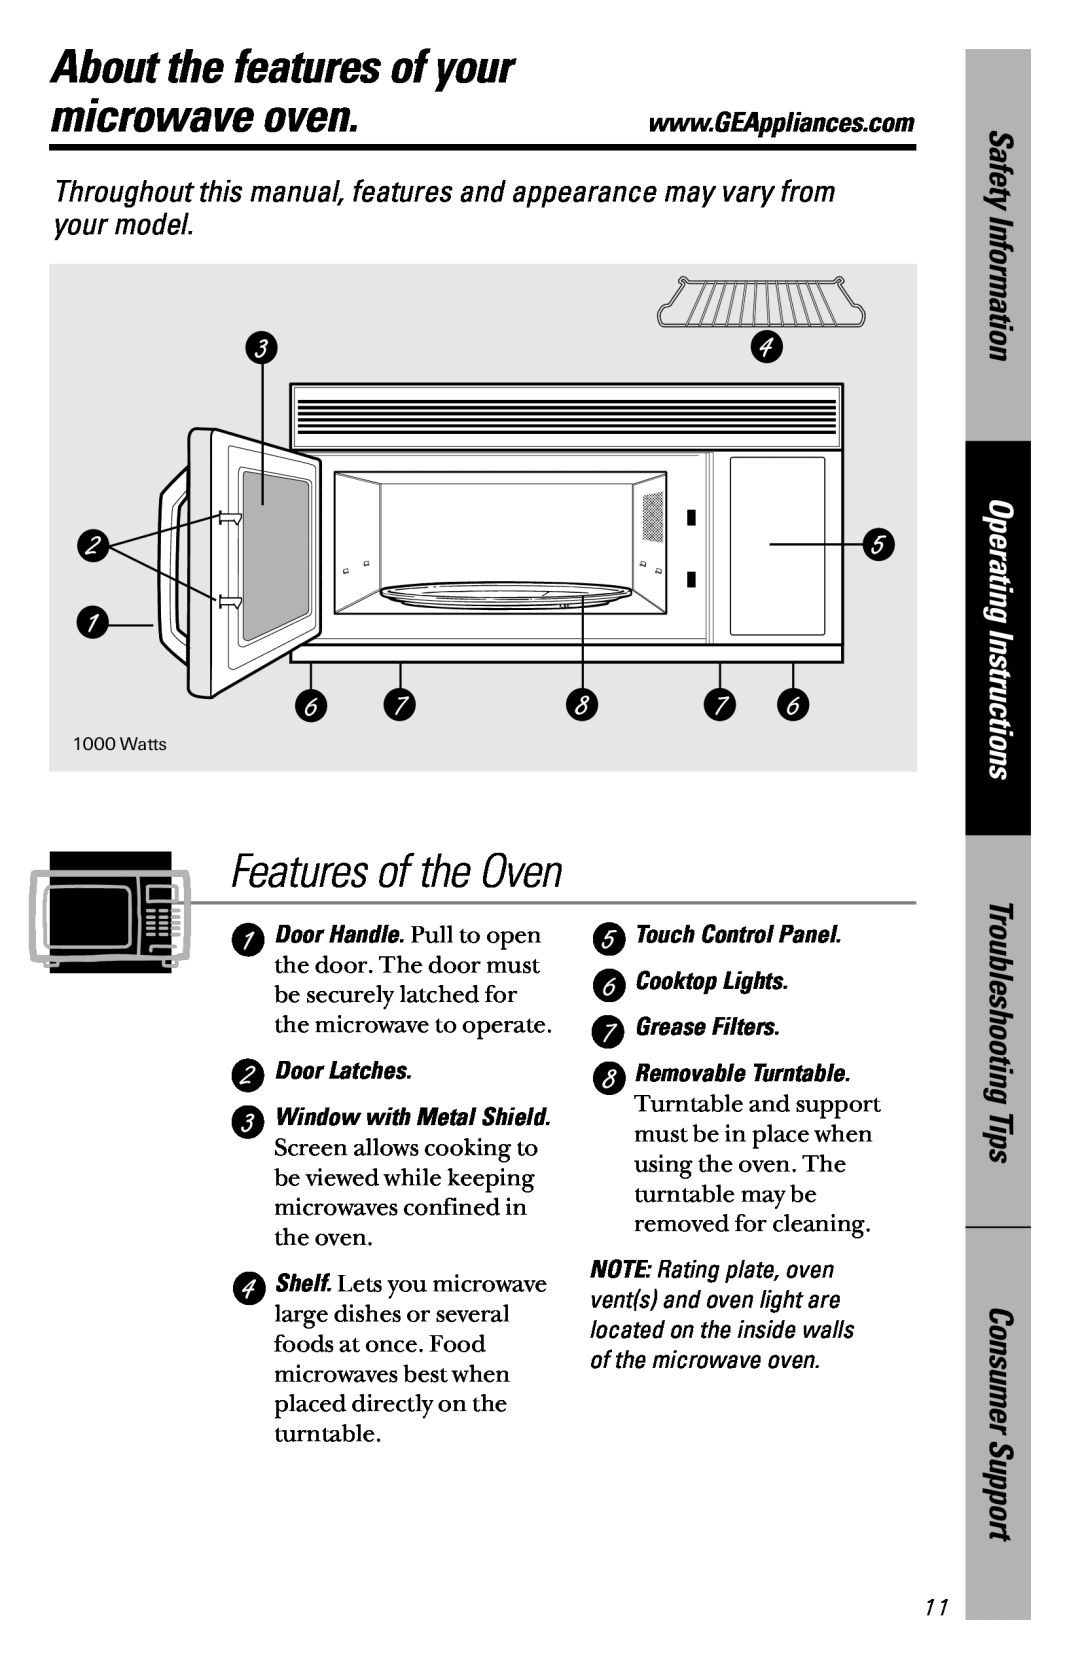 GE JVM1533 About the features of your, microwave oven, Features of the Oven, Safety Information, Operating Instructions 